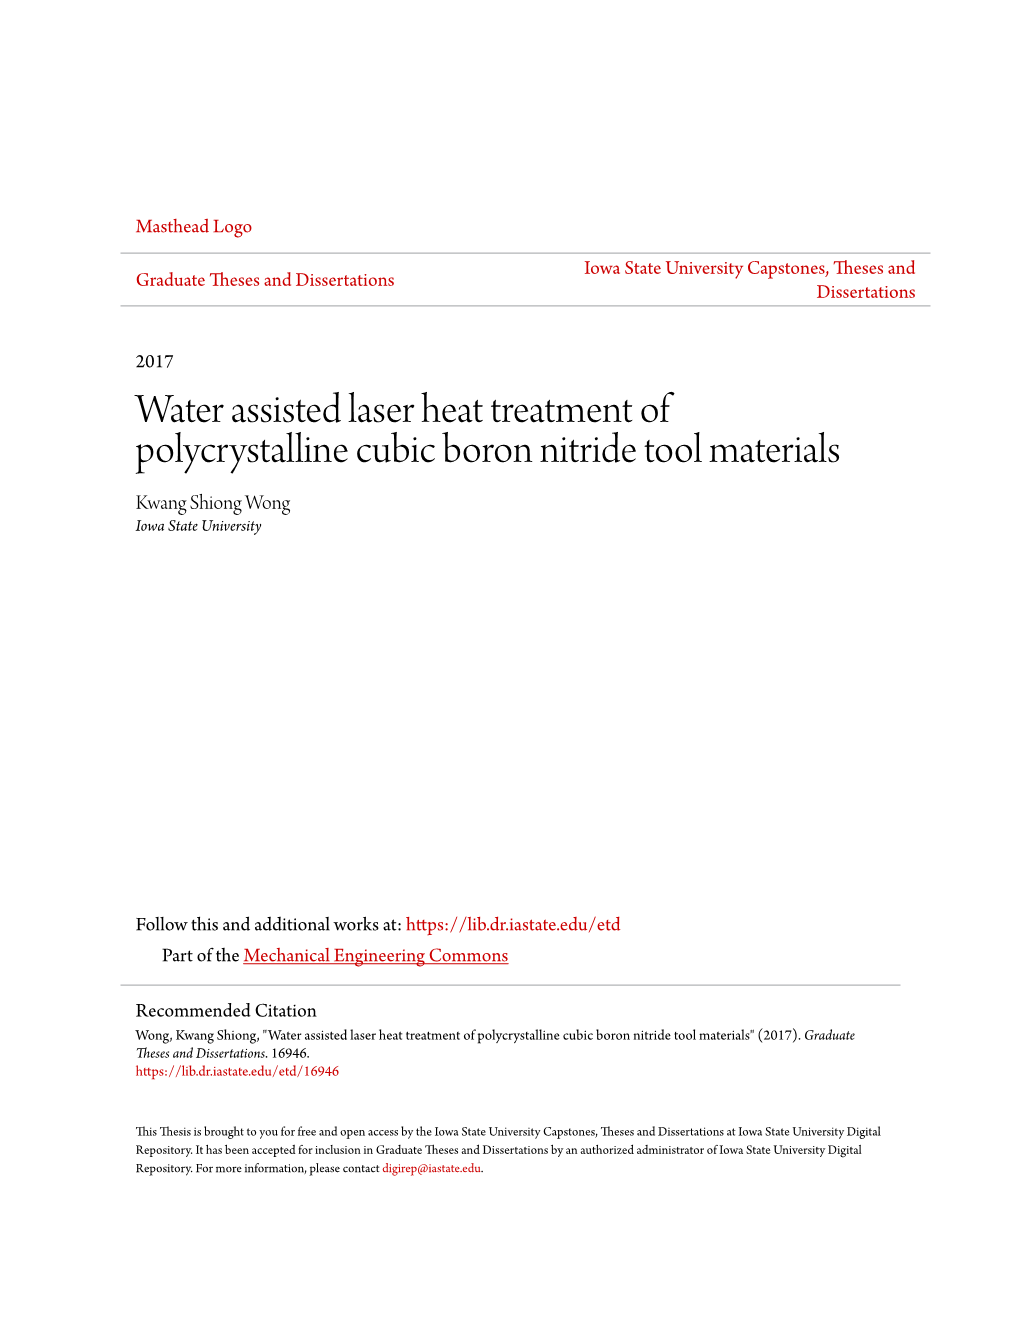 Water Assisted Laser Heat Treatment of Polycrystalline Cubic Boron Nitride Tool Materials Kwang Shiong Wong Iowa State University